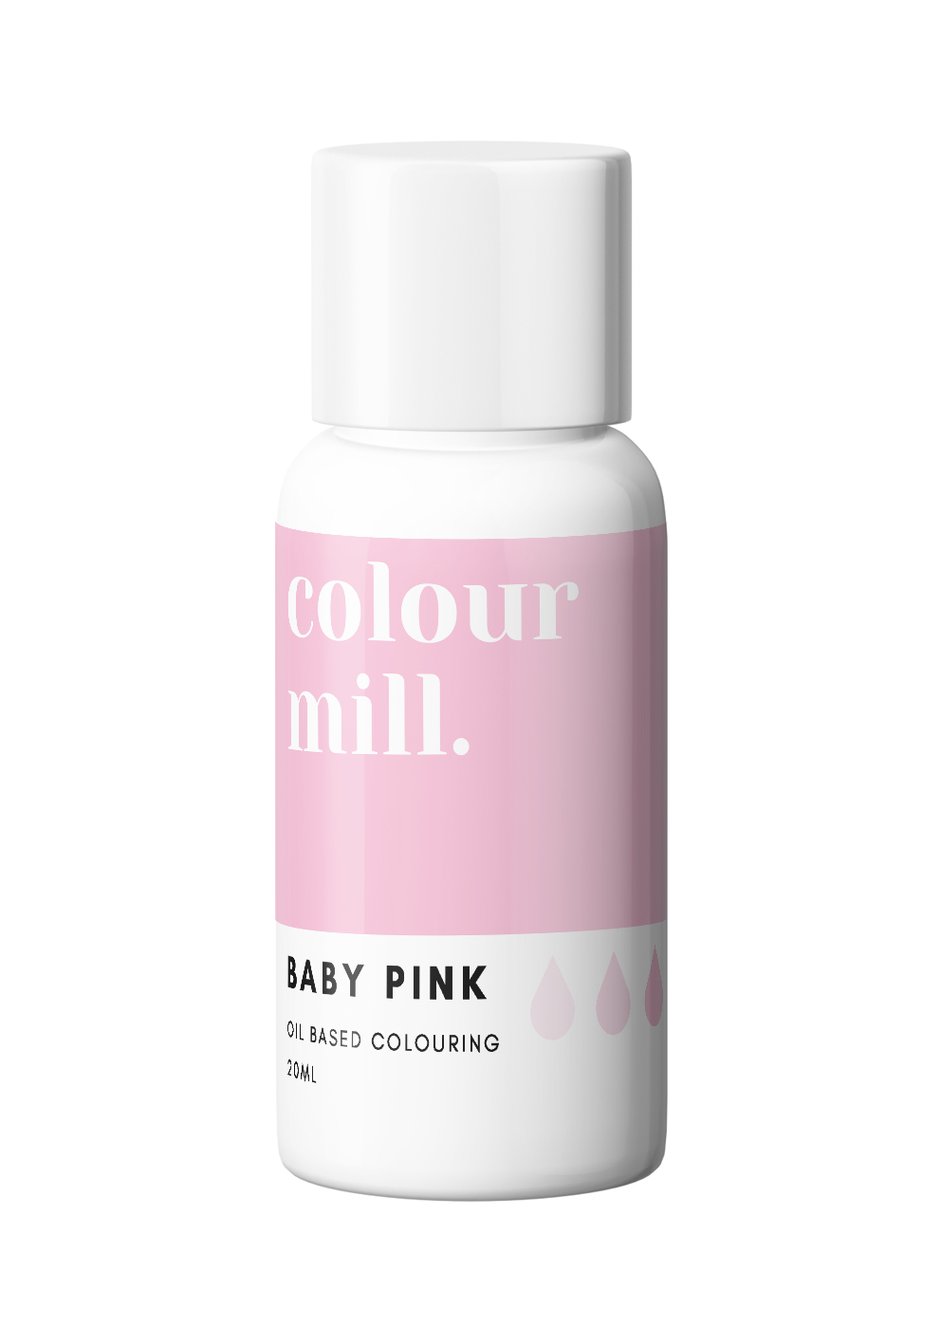 Colorant Colour Mill liposoluble Baby Pink 20ml